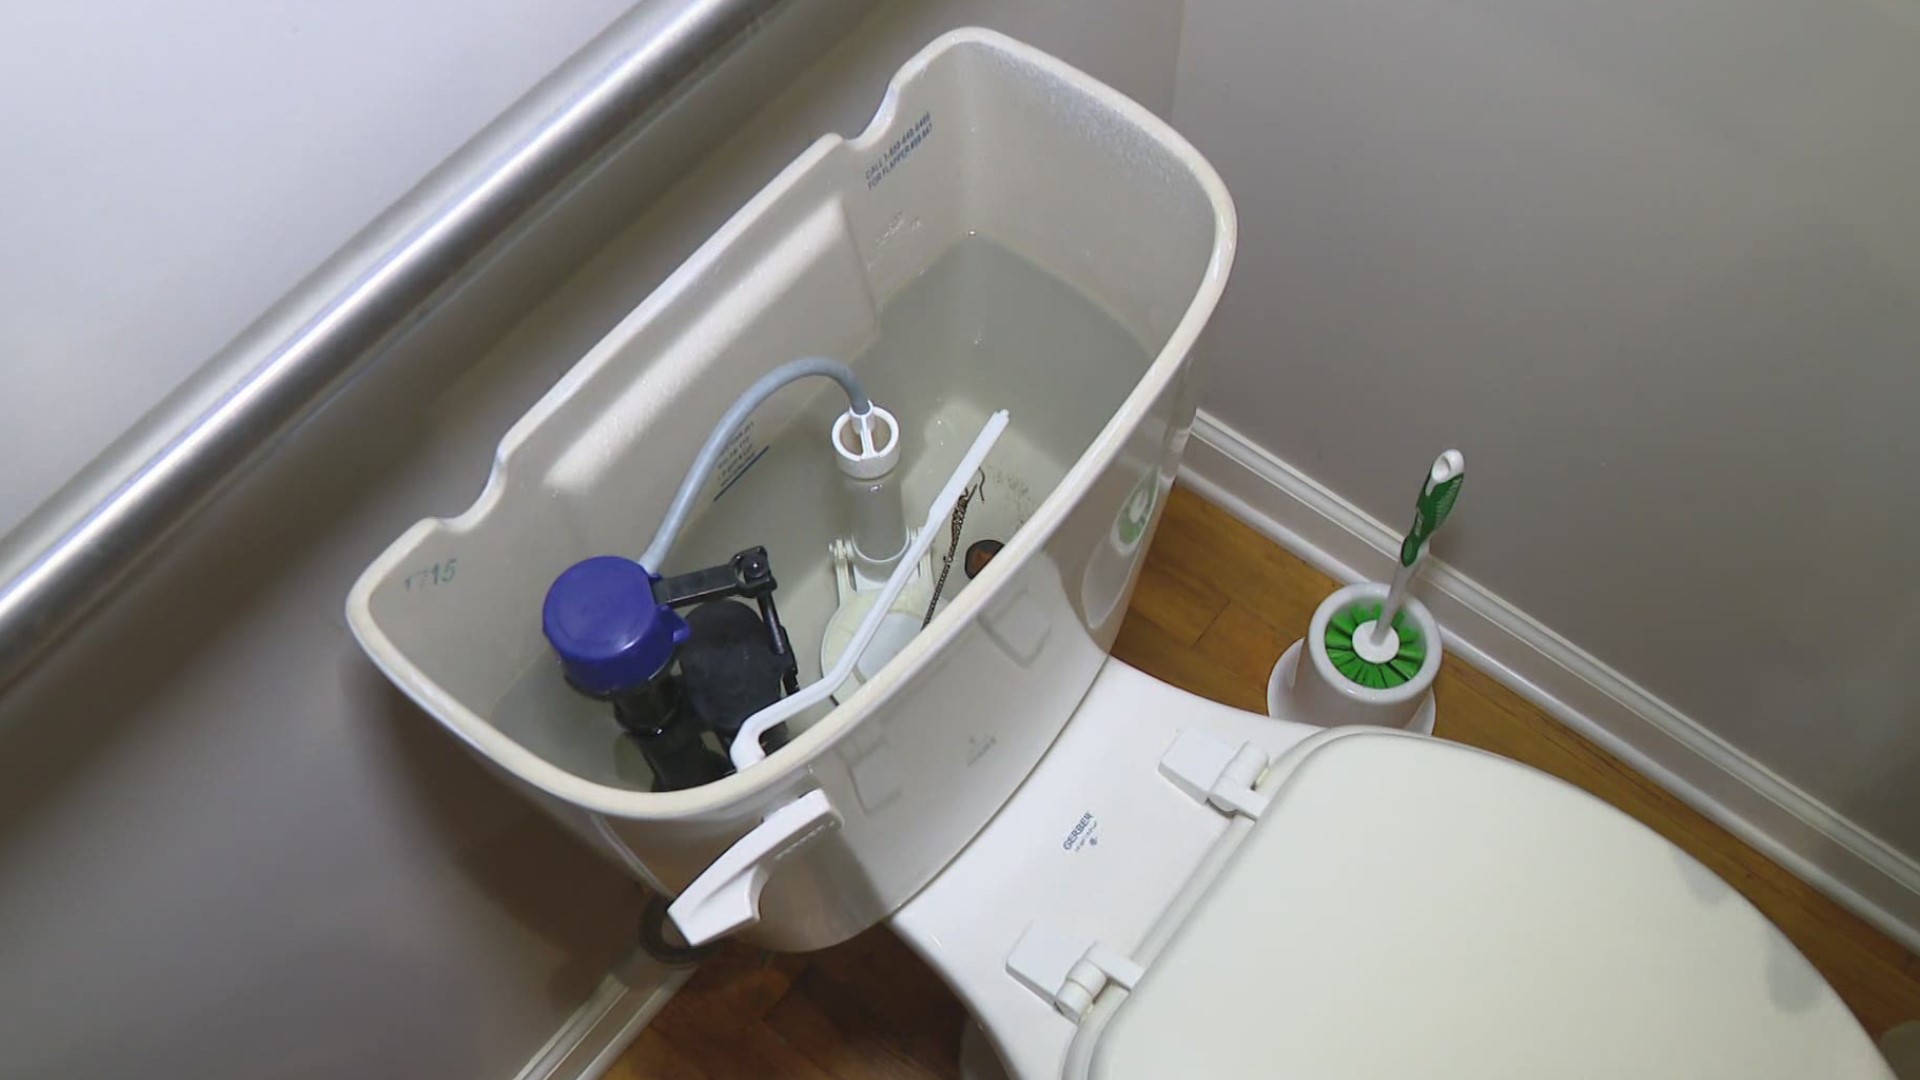 Some toilet repairs are simple, inexpensive and don't require a plumber.